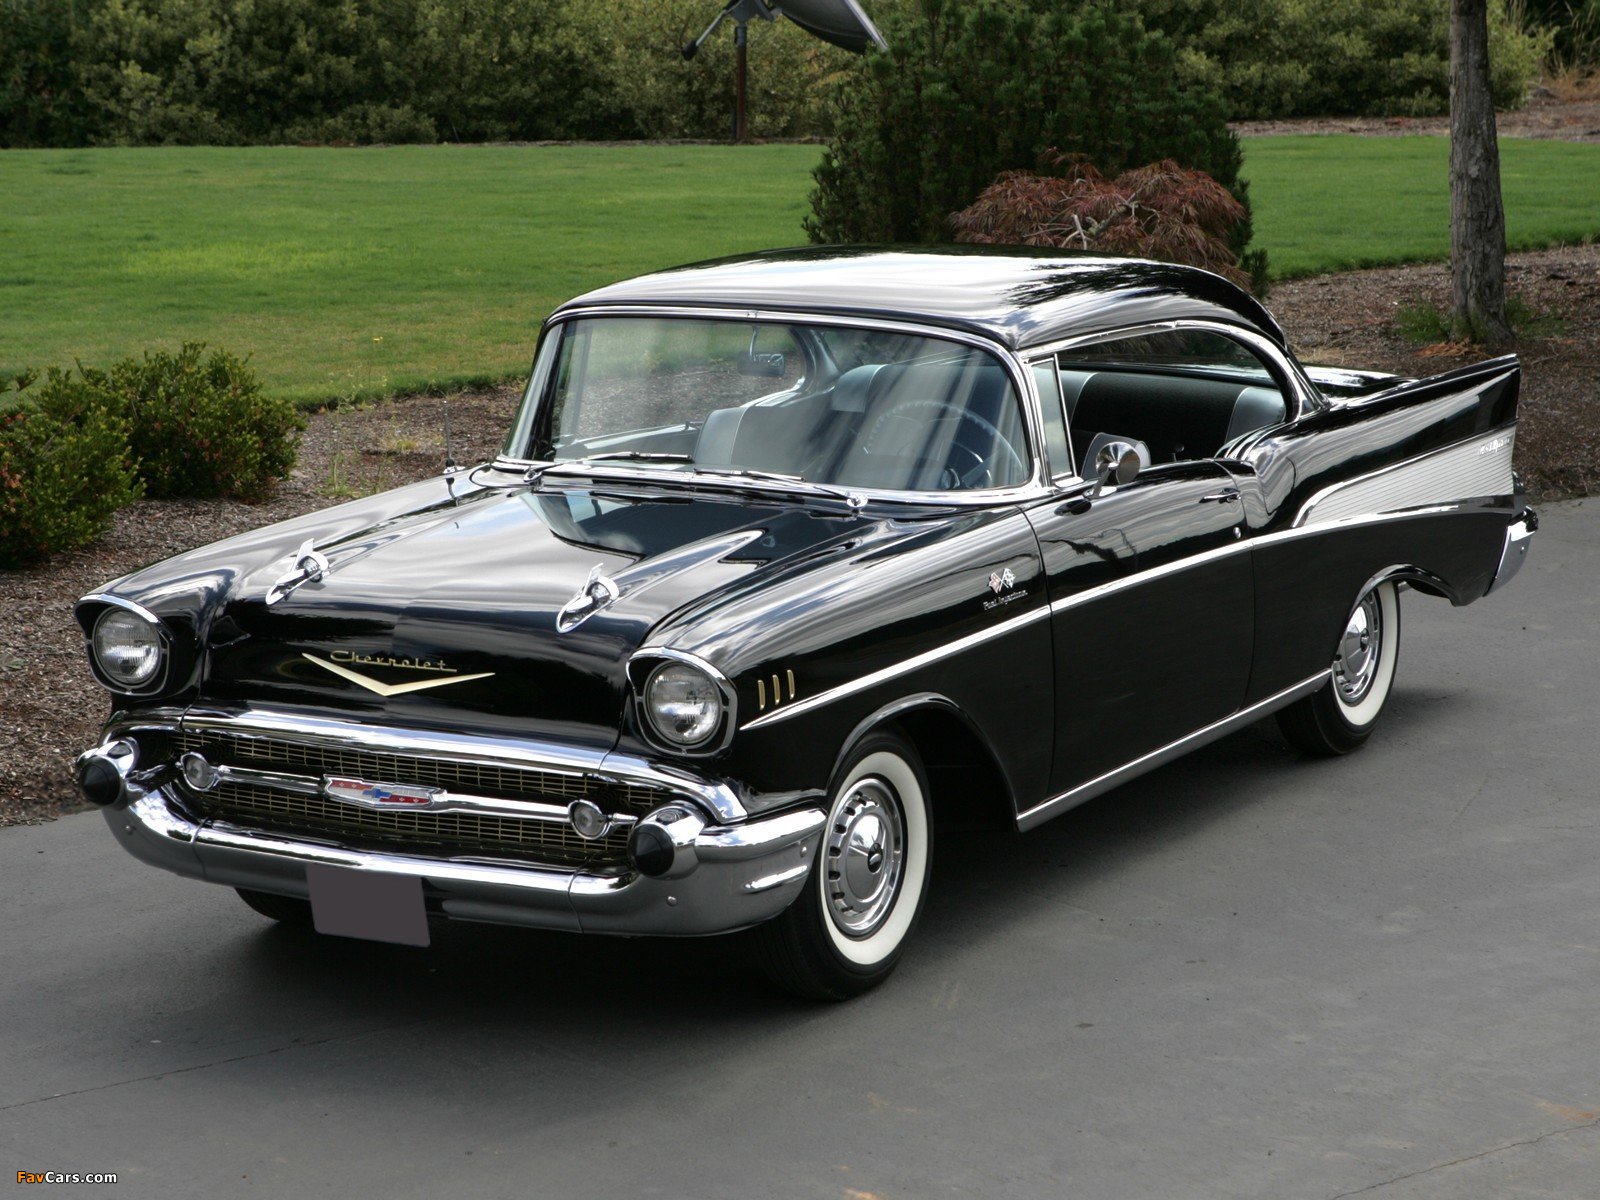 1957 Chevrolet Bel Air Fuel Injection